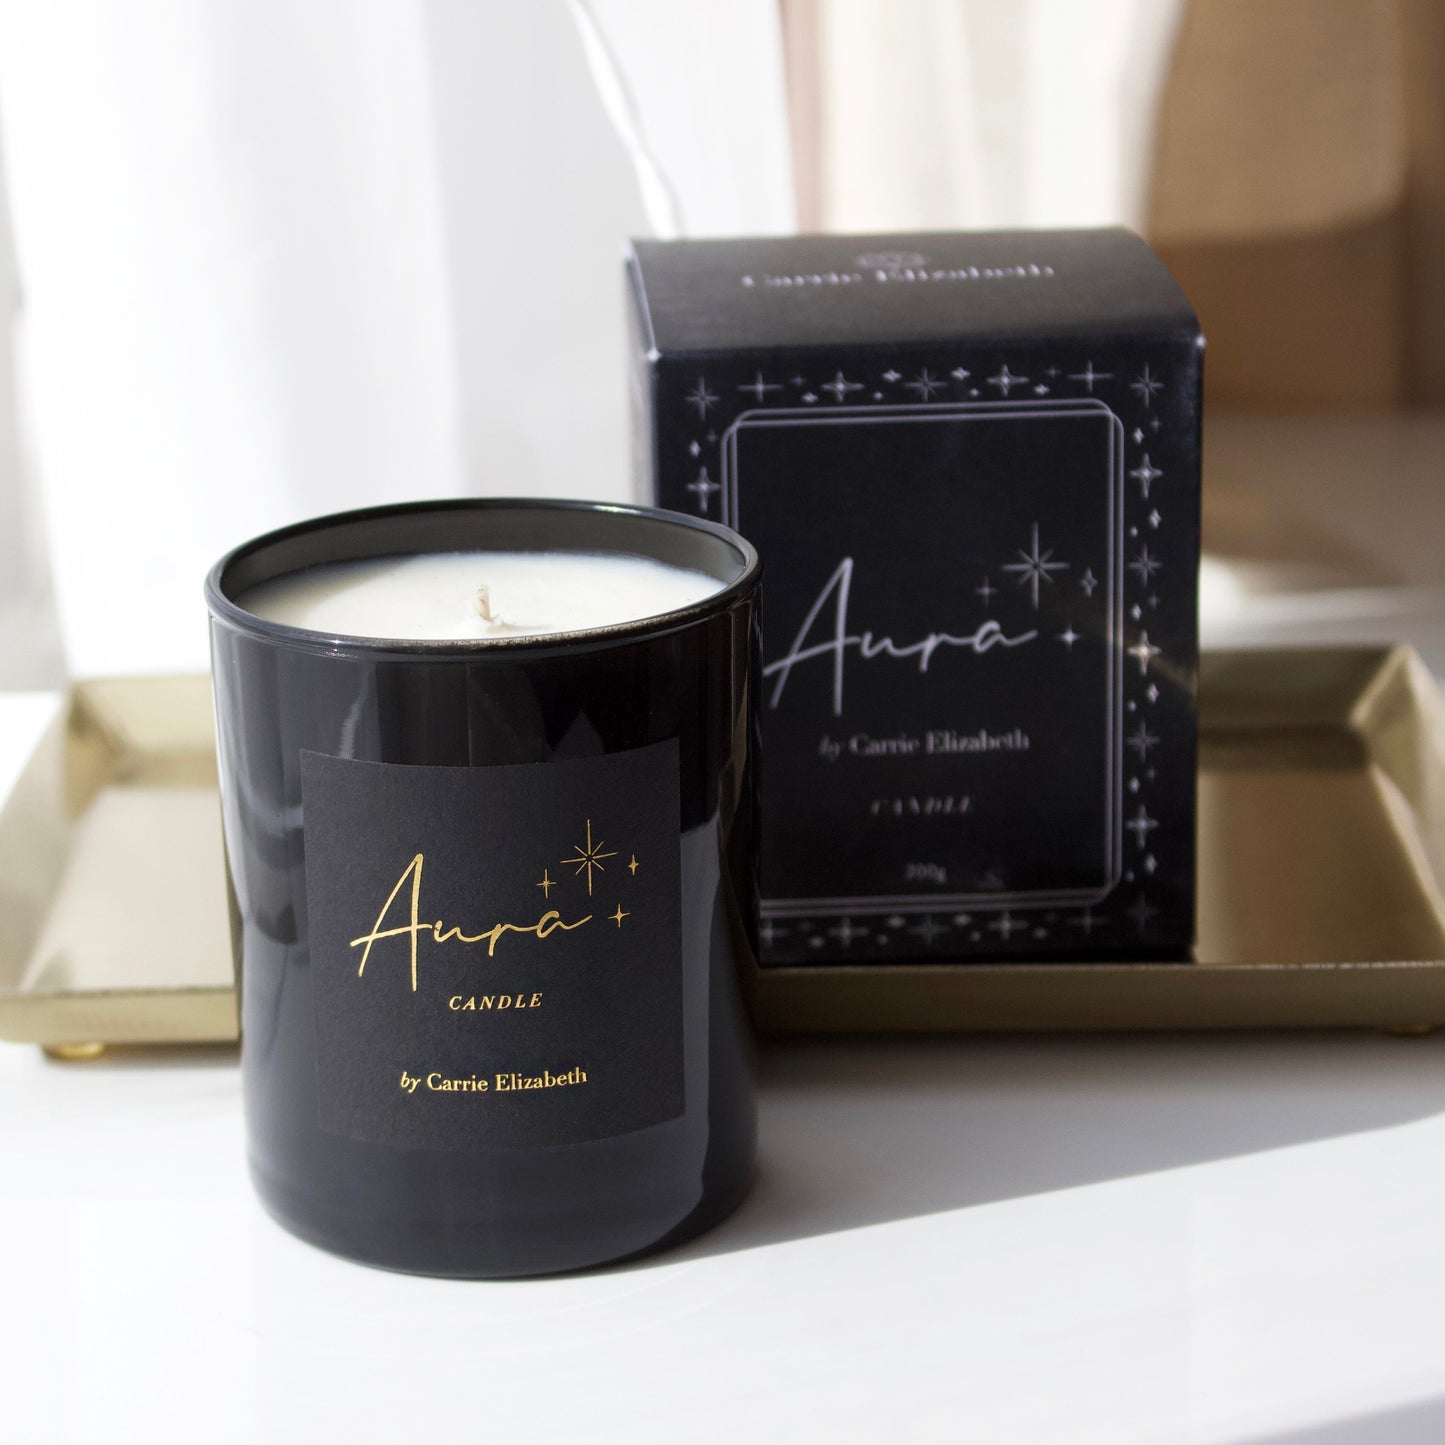 Carrie elizabeth luxury scented candle